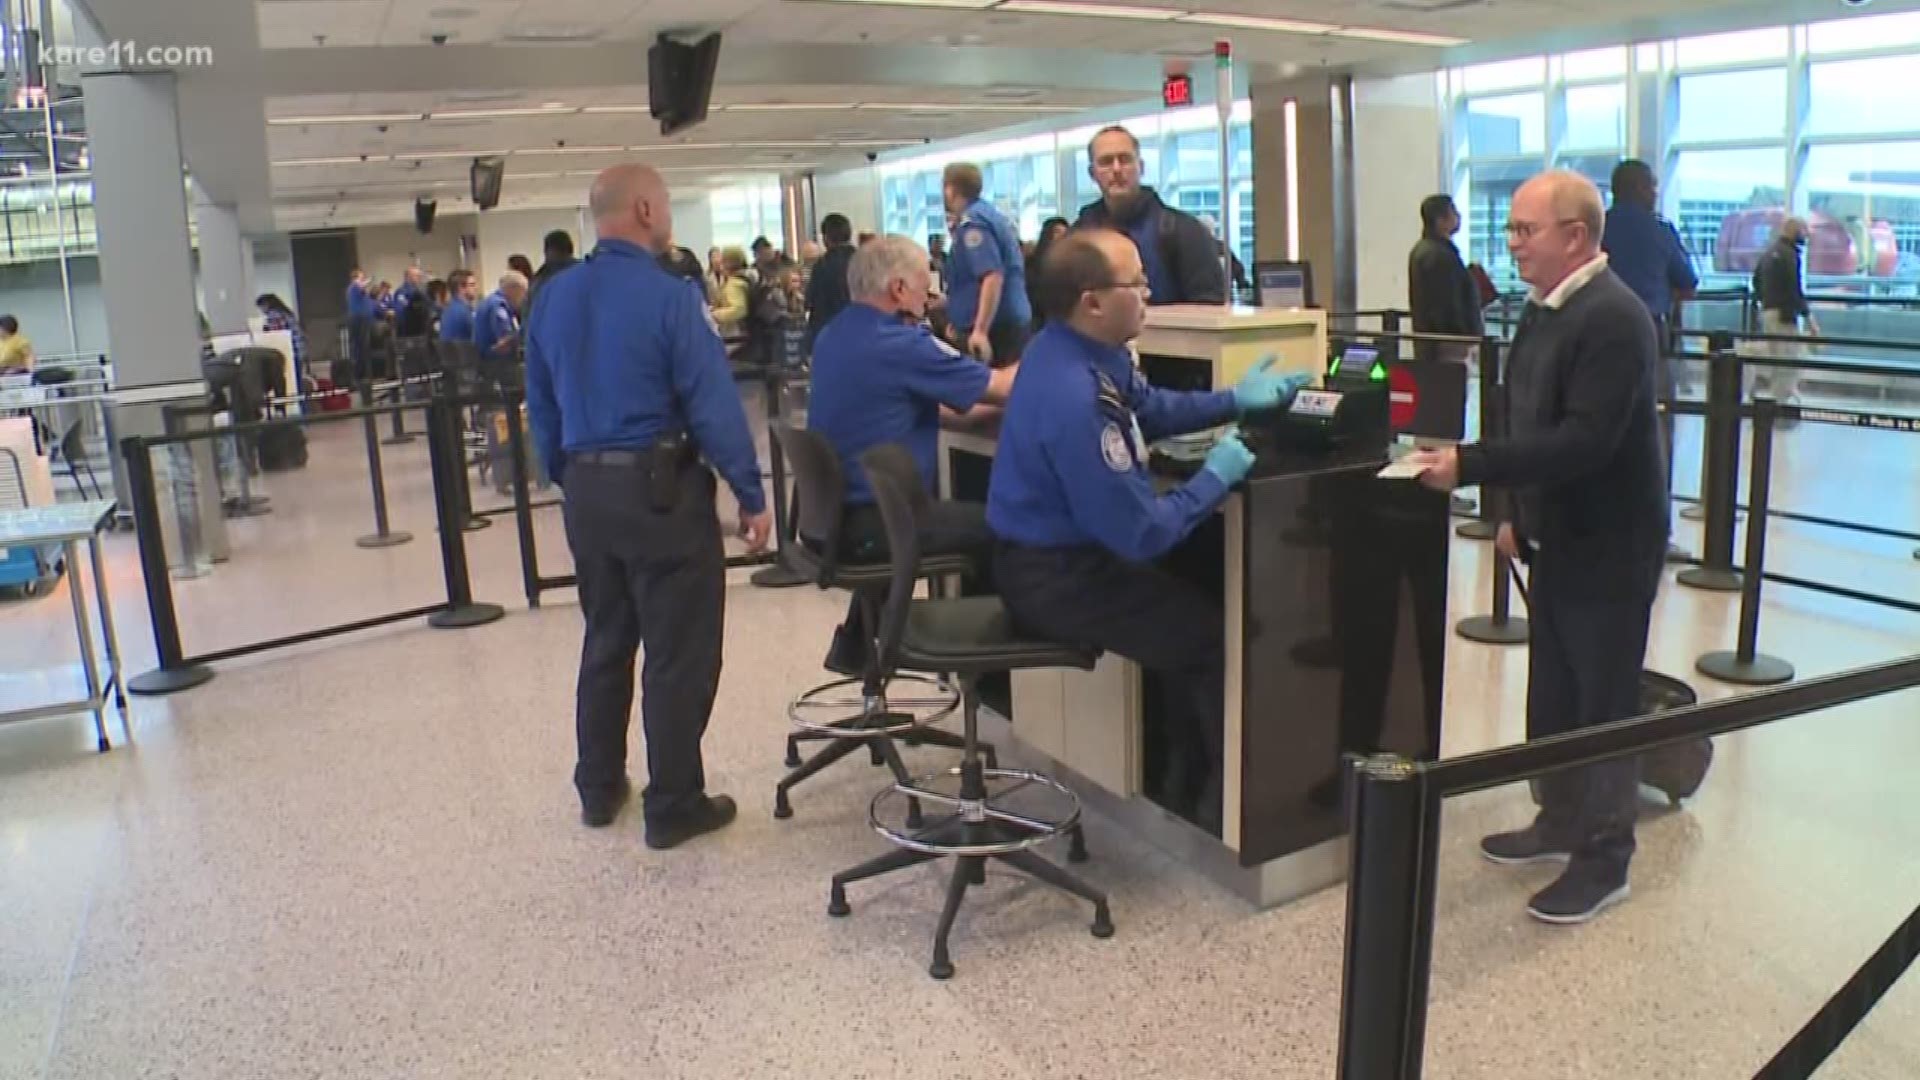 Many of you may be getting away for the winter or planning spring break trips. KARE 11's Gordon Severson looks at how the shutdown is affecting things at MSP International Airport.